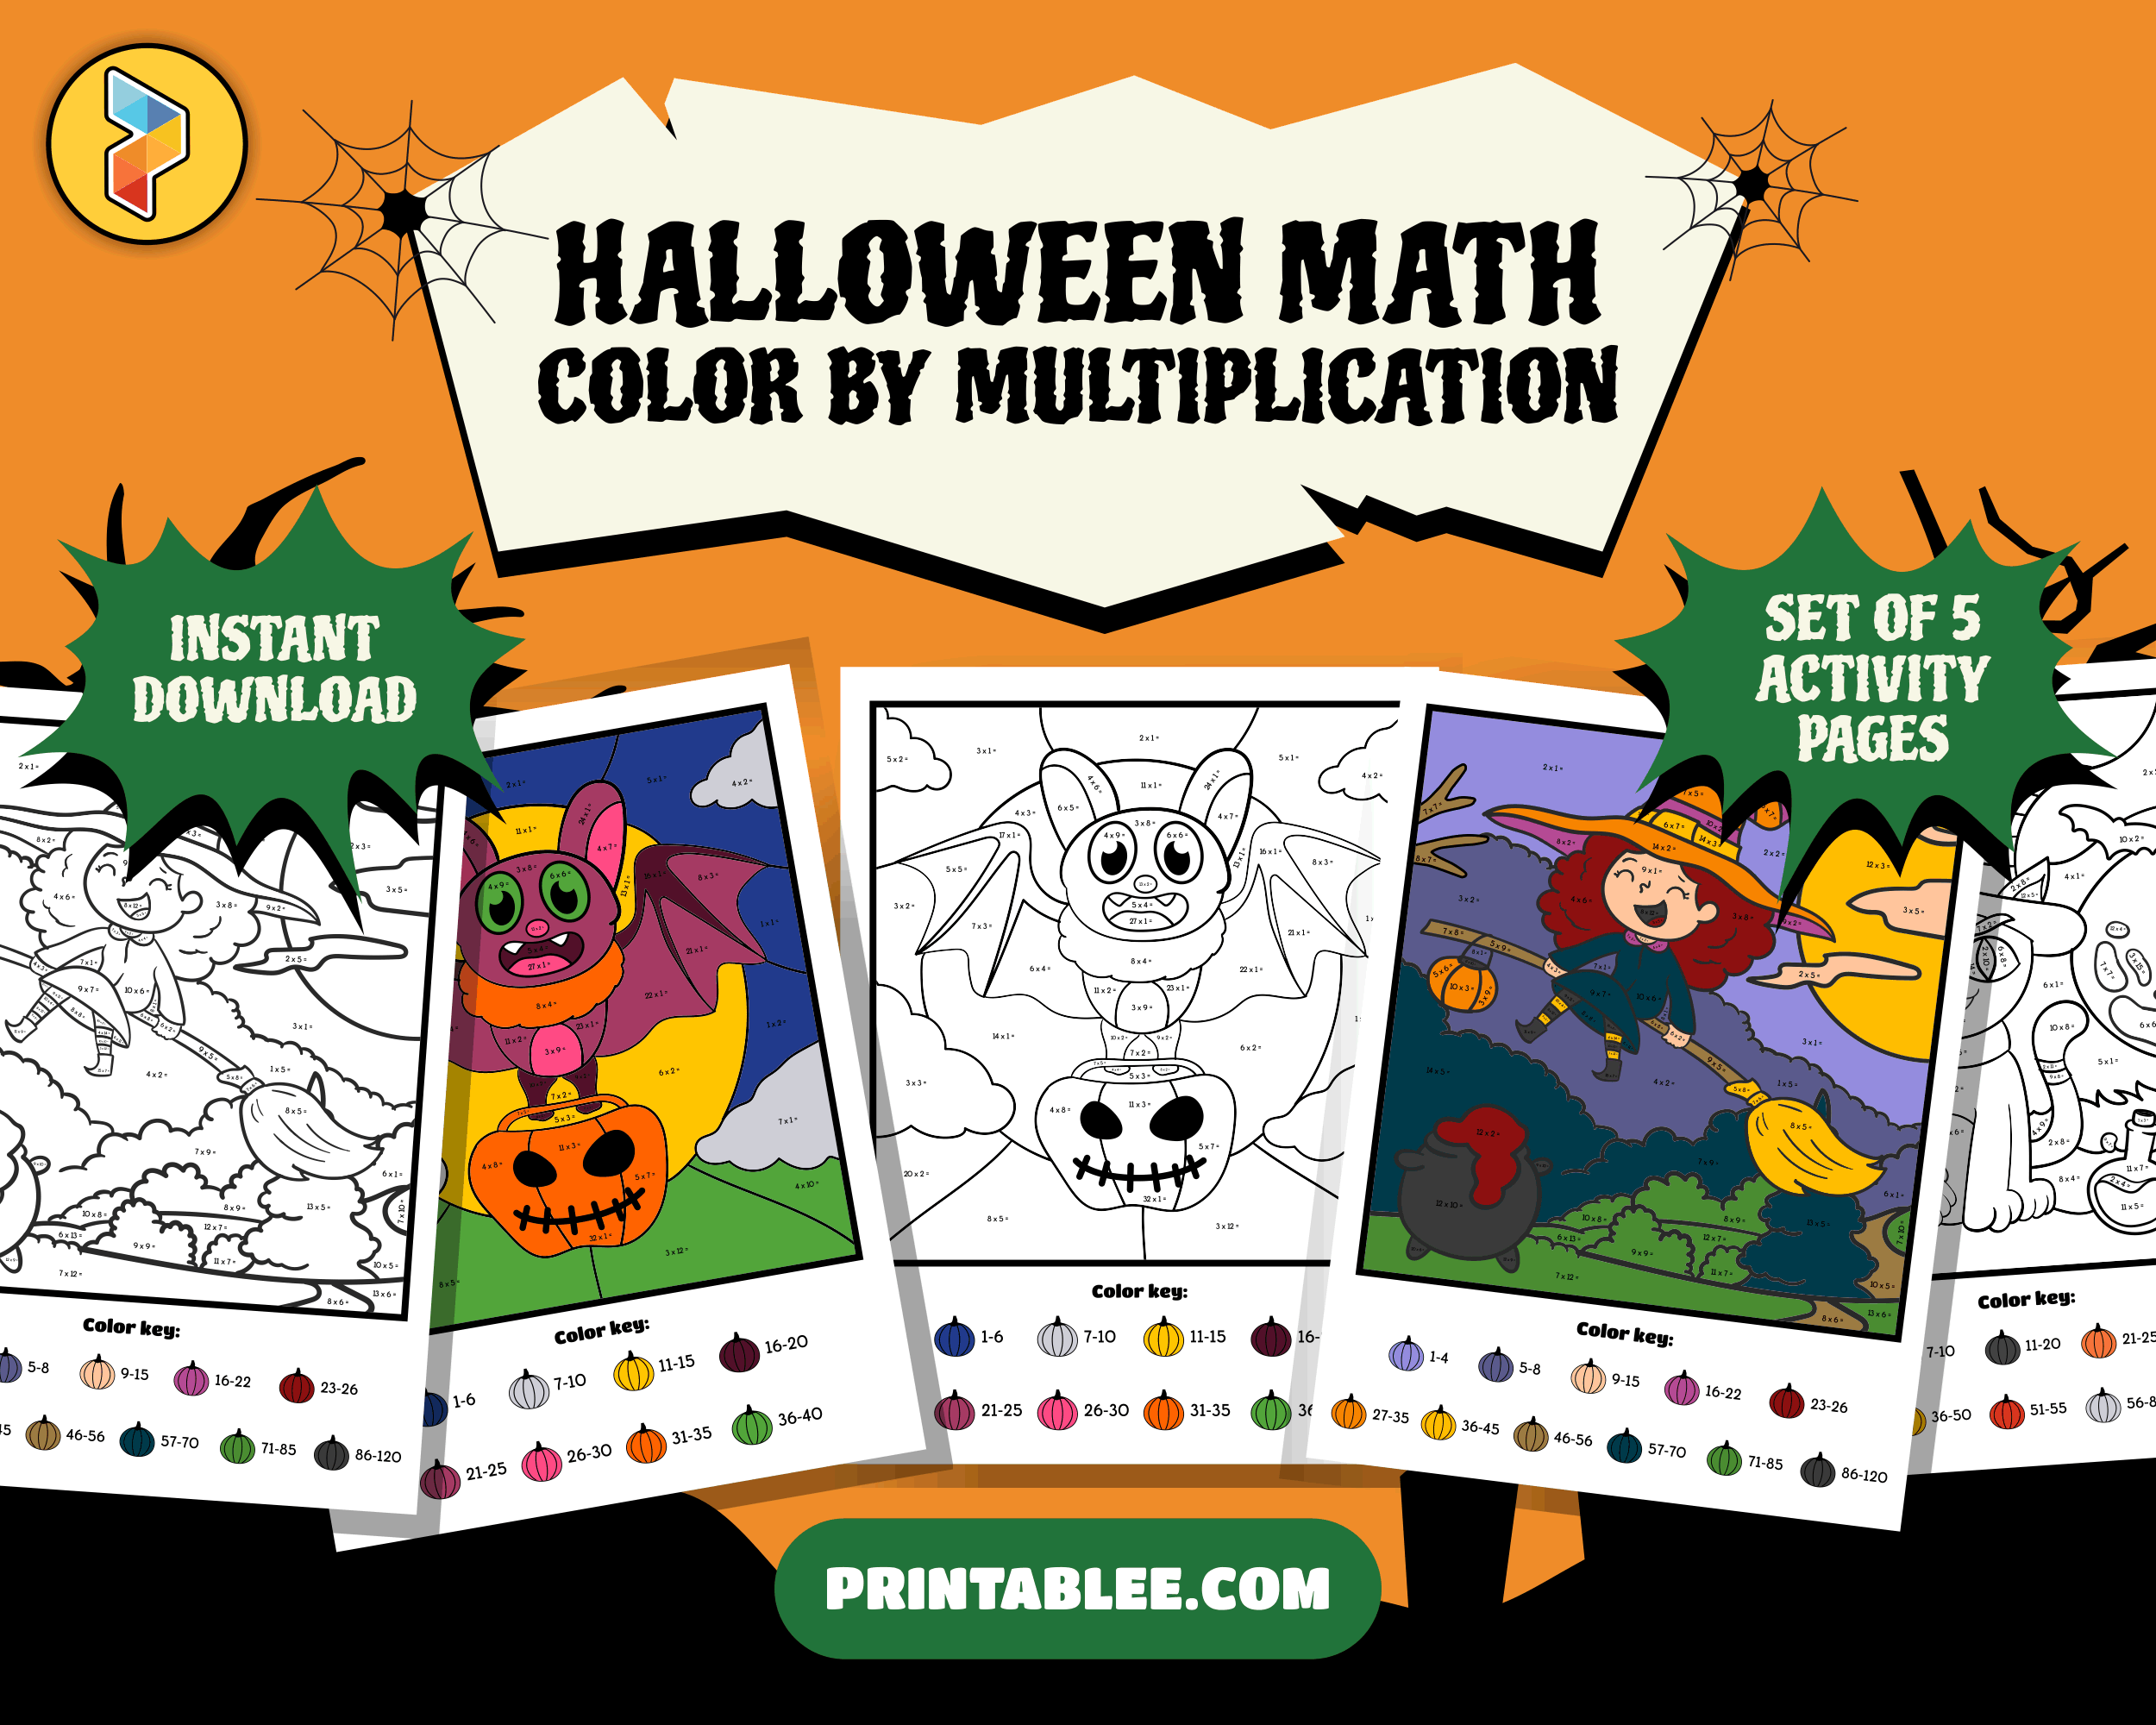 Color by Number Activity Printable for Kids - Halloween Theme, Fun and Easy Multiplication | Halloween Math Color by Multiplication